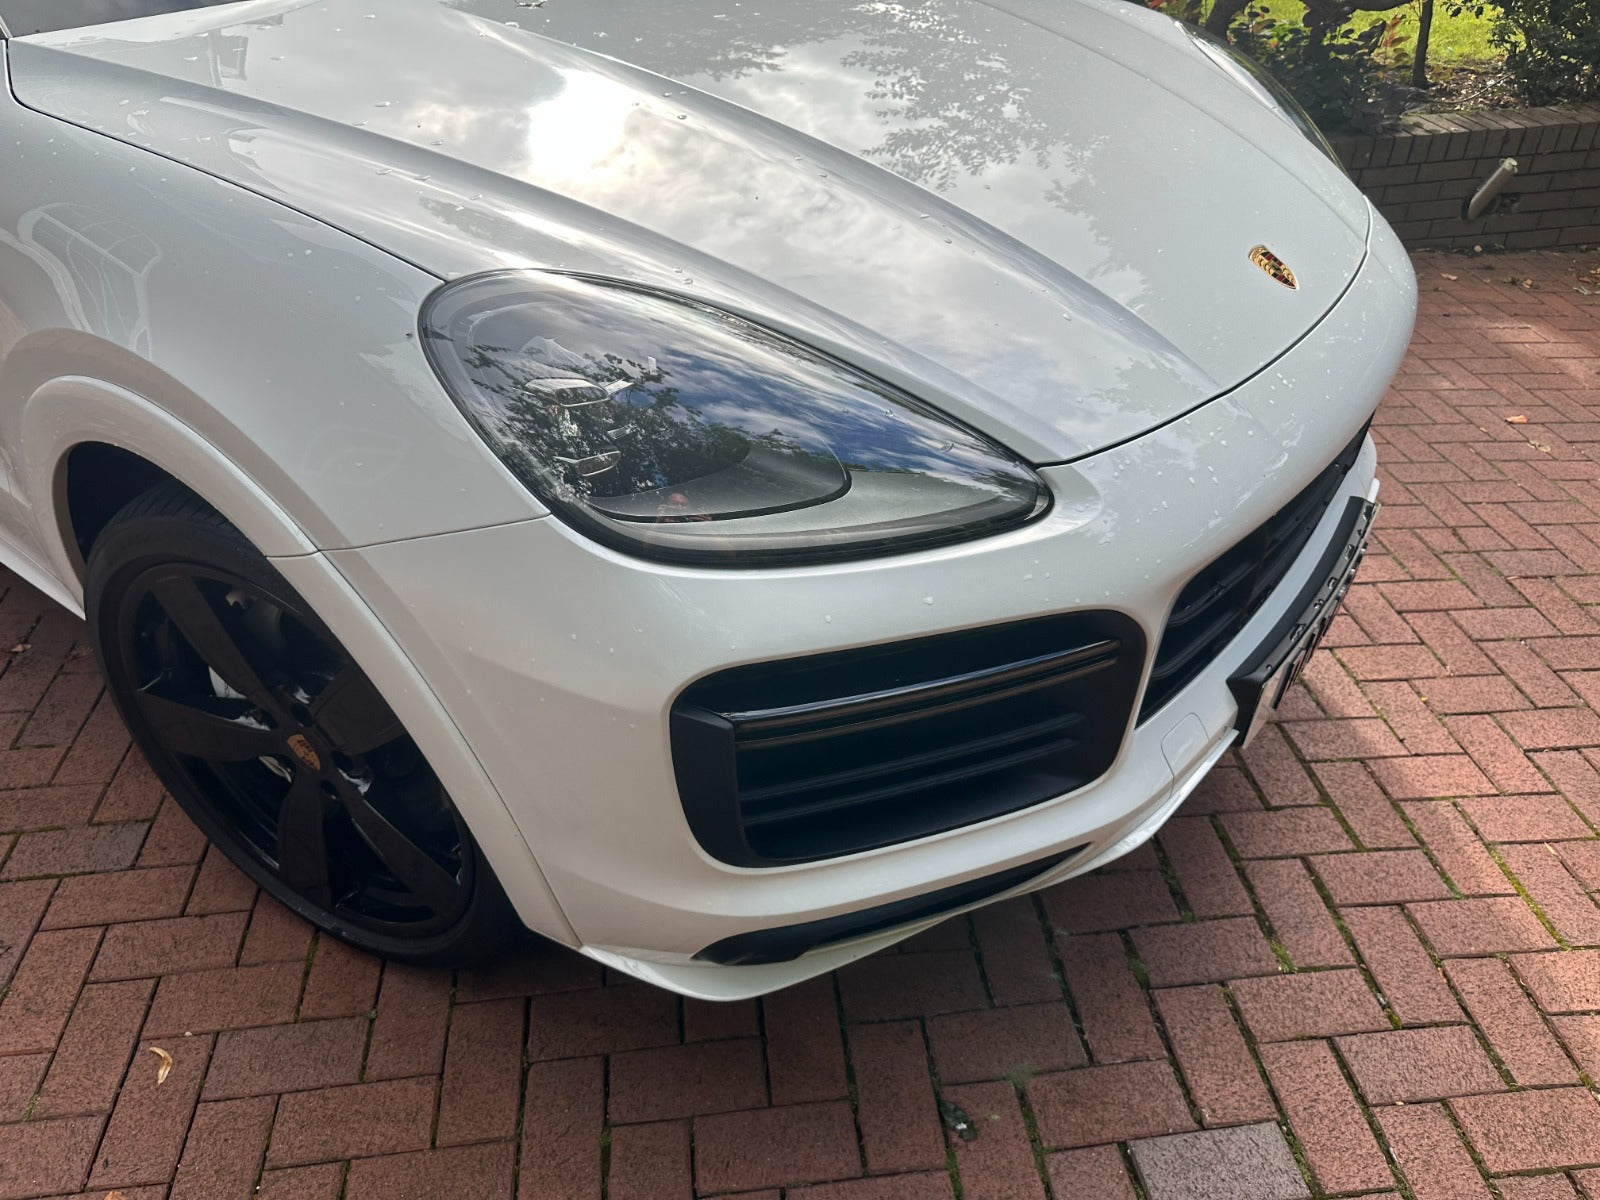 Bid on 2019 PORSCHE CAYENNE 4.0 V8 TURBO 5DR SUV EURO 6 - ONLY 28K MILES - PORSCHE EXTENDED WARRANTY- Buy &amp; Sell on Auction with EAMA Group